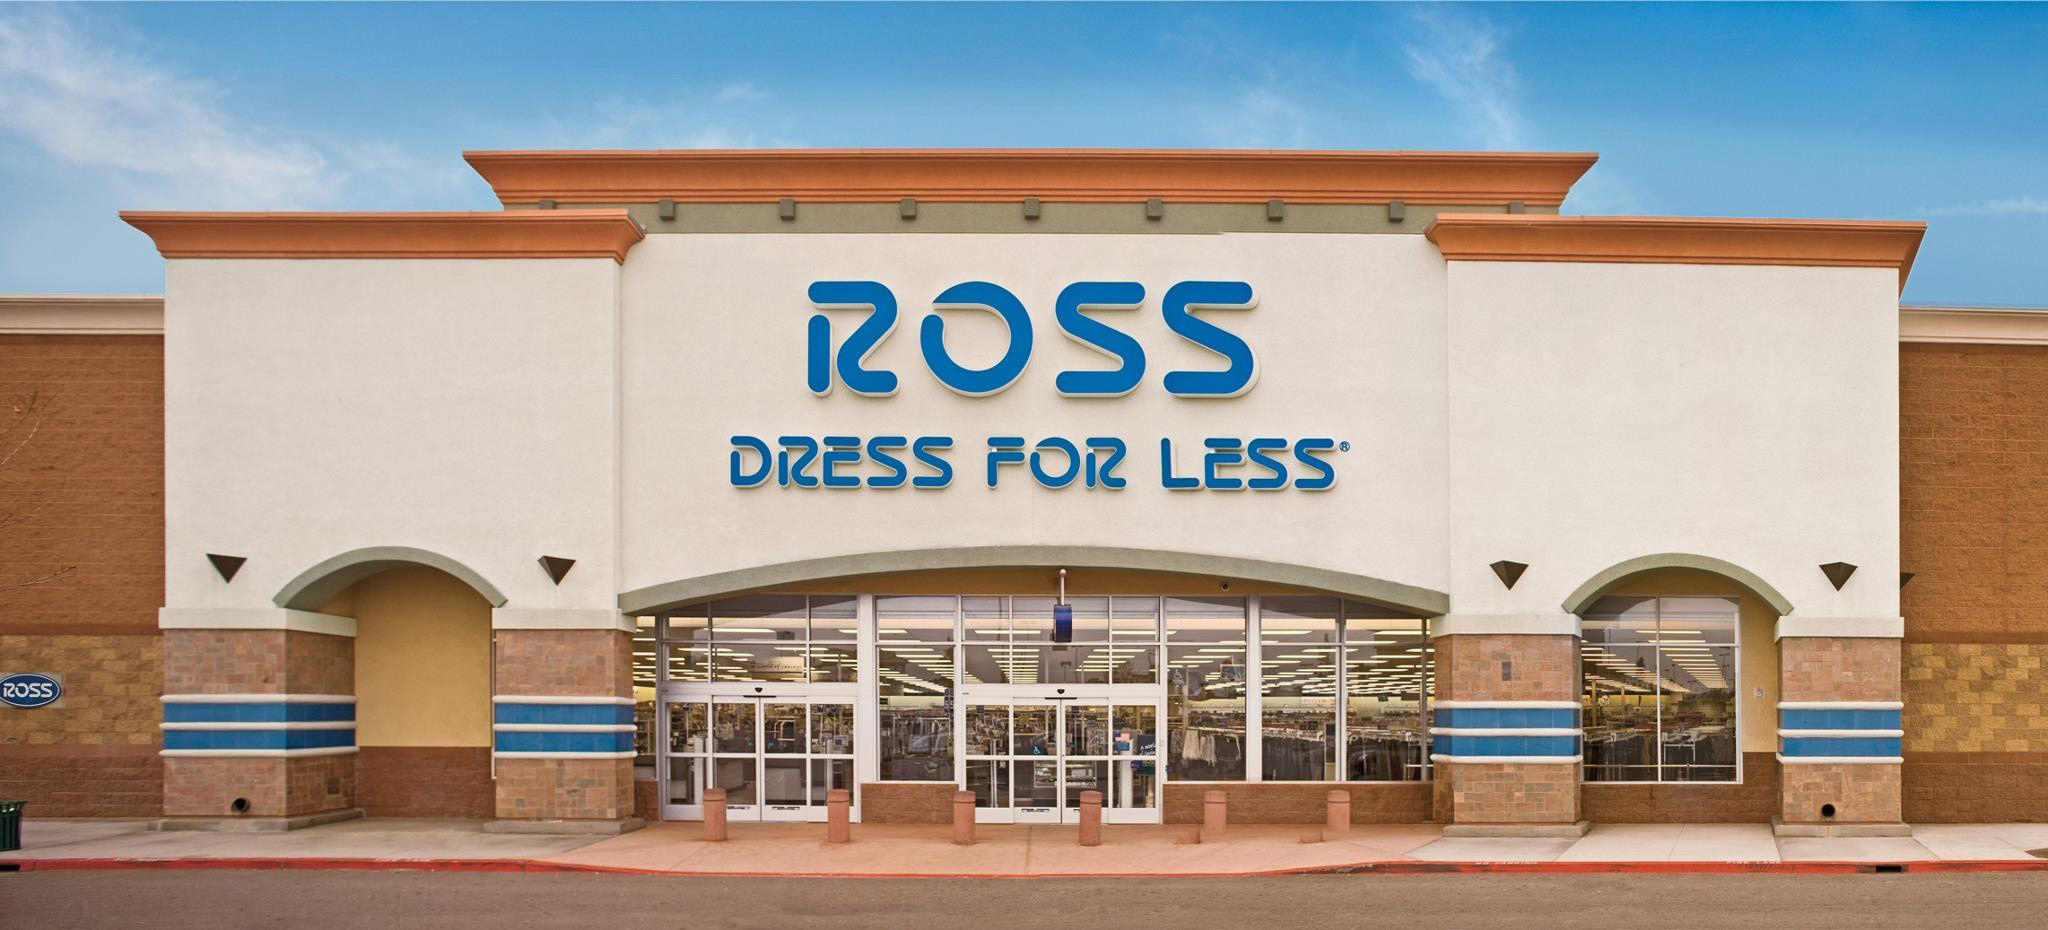 Ross Stores Reports Improved Trends in Third Quarter Sales and Earnings image